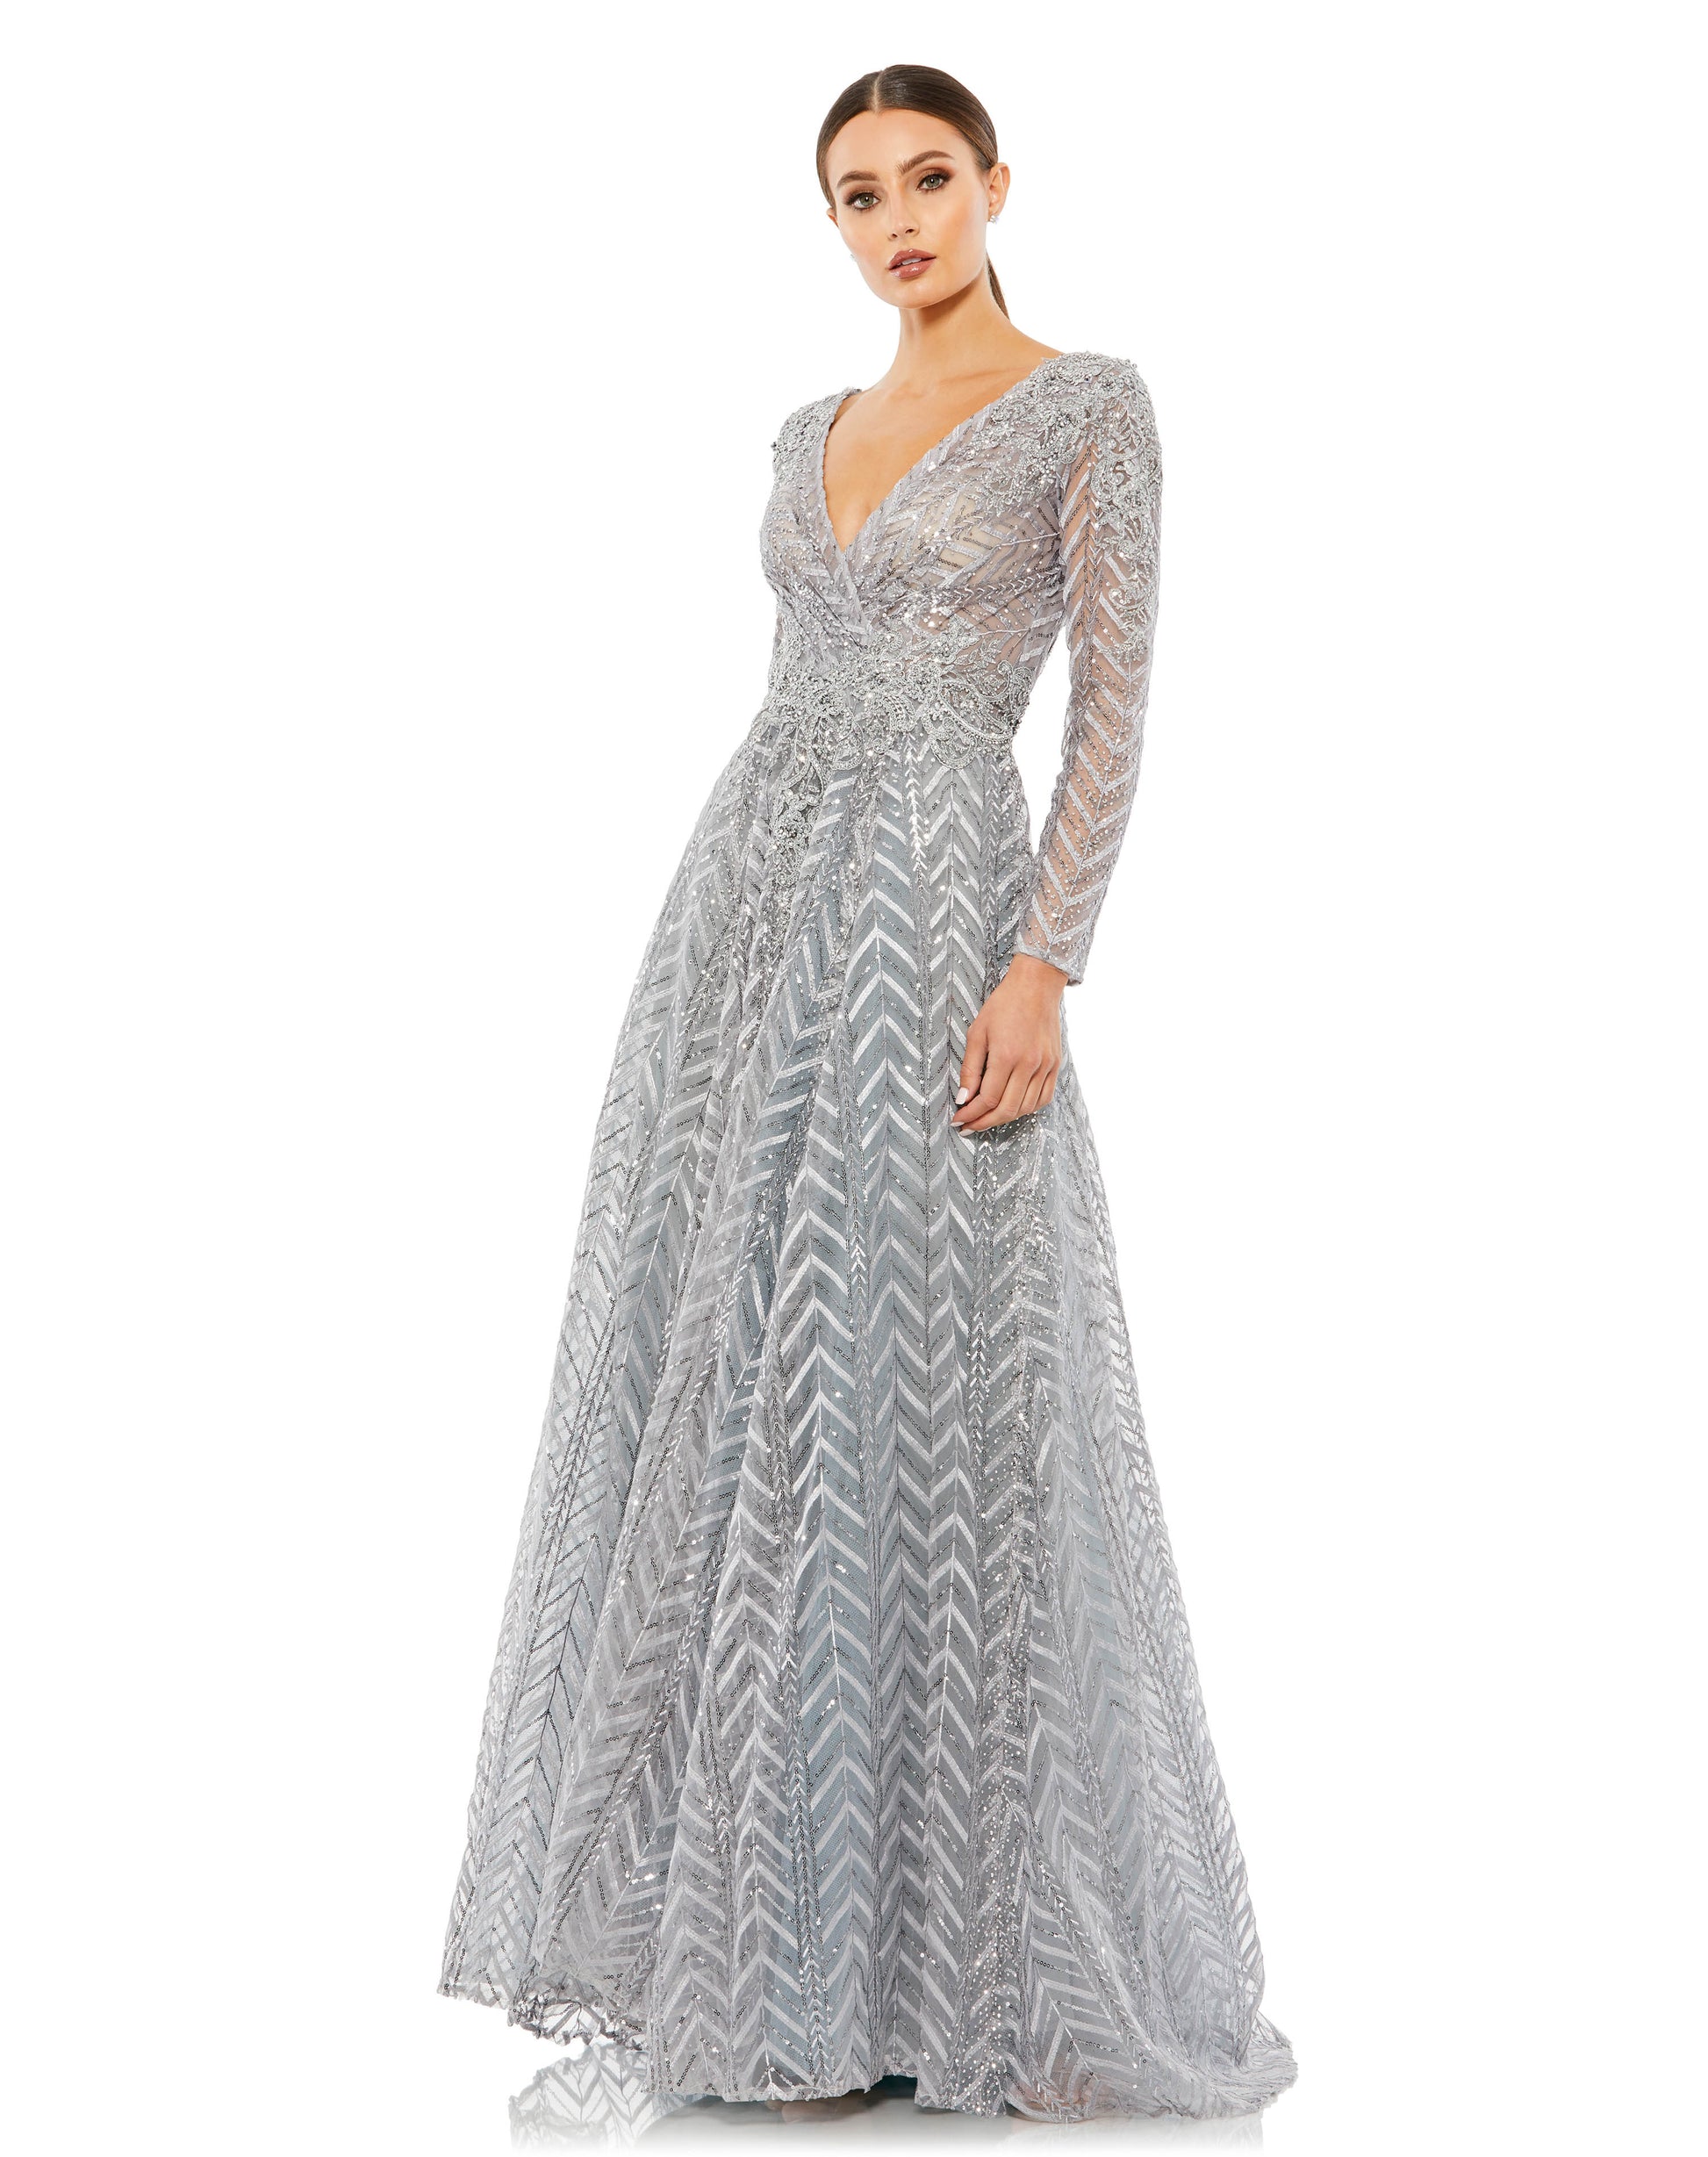 Embellished chevron-and-floral embroidered evening gown features semi-sheer illusion sleeves and bodice, a plunging v-neckline, and a floor length a-line skirt with a sweeping train. Mac Duggal Partially Lined Back Zipper 100% Polyester Long Sleeve Full L